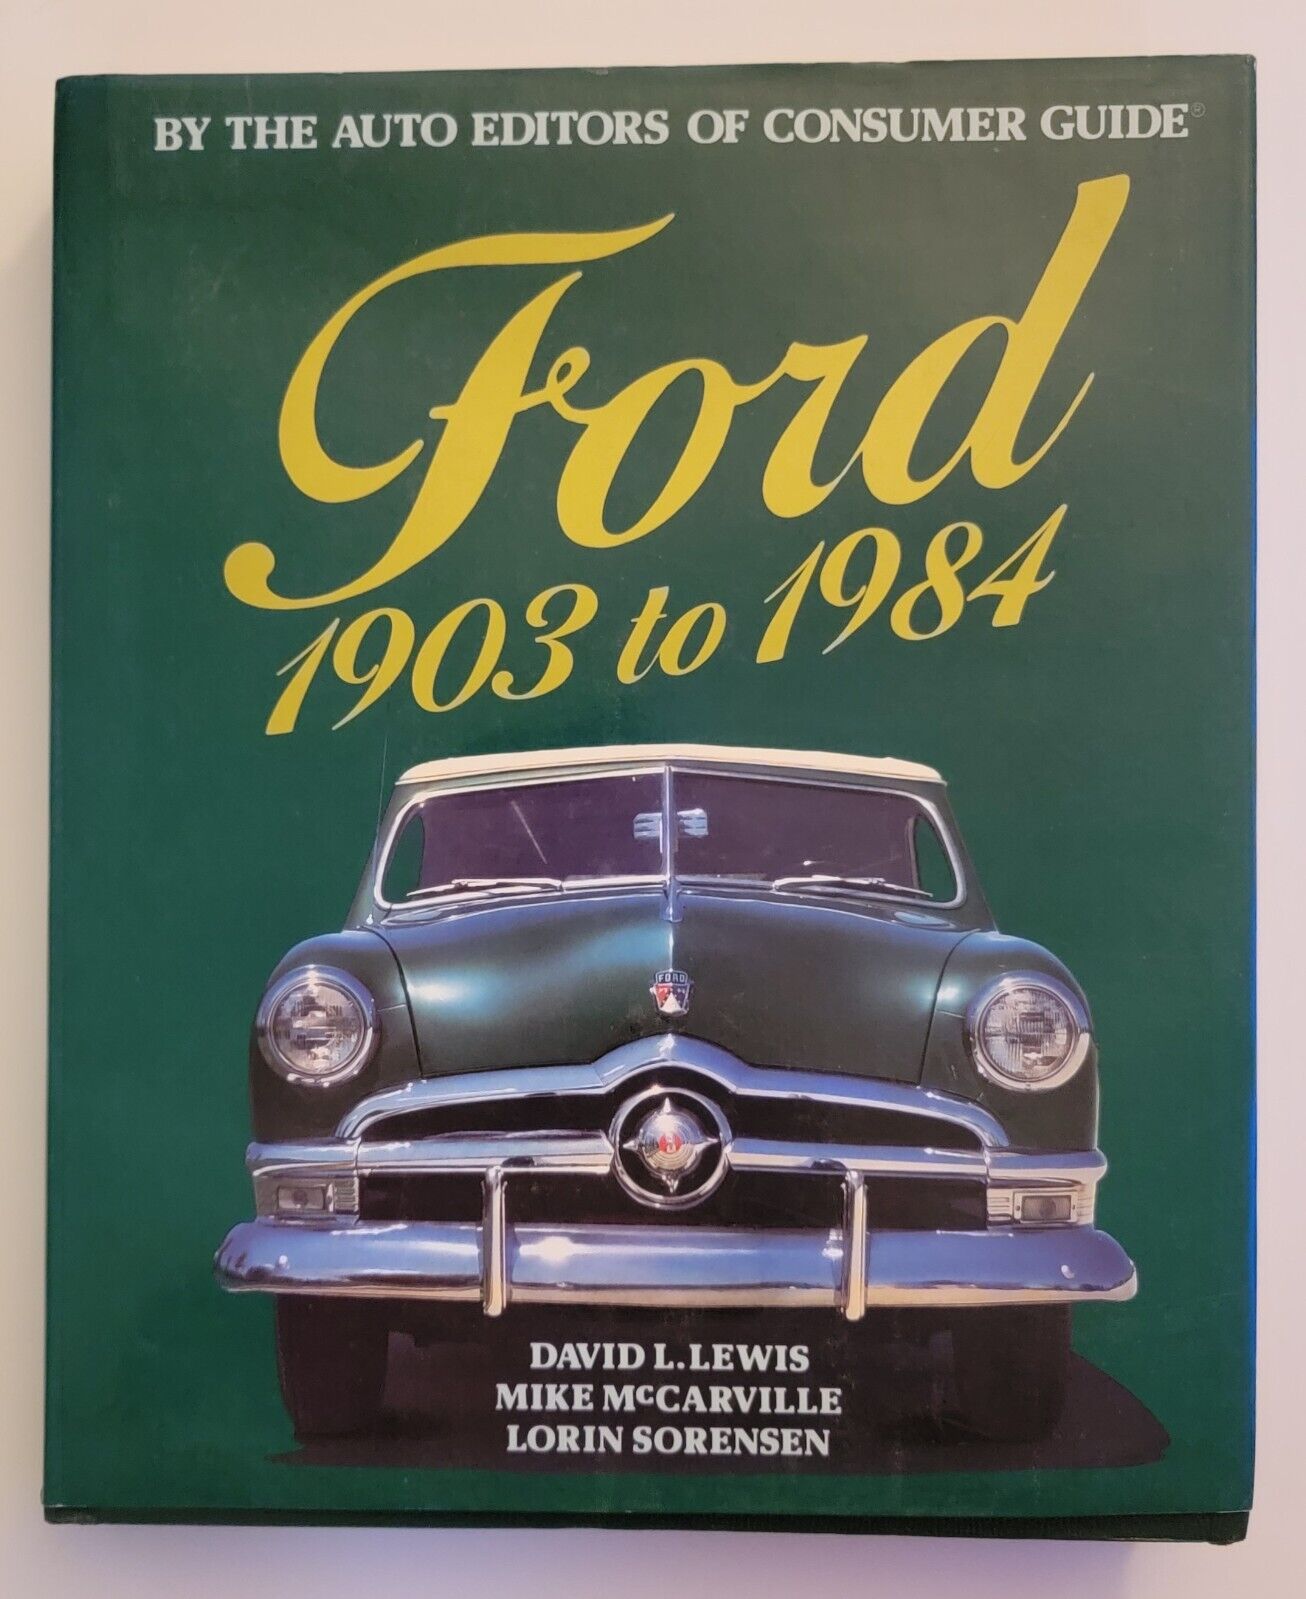 Ford 1903 to 1984 By the Auto Editors of Consumer Guide First Edition